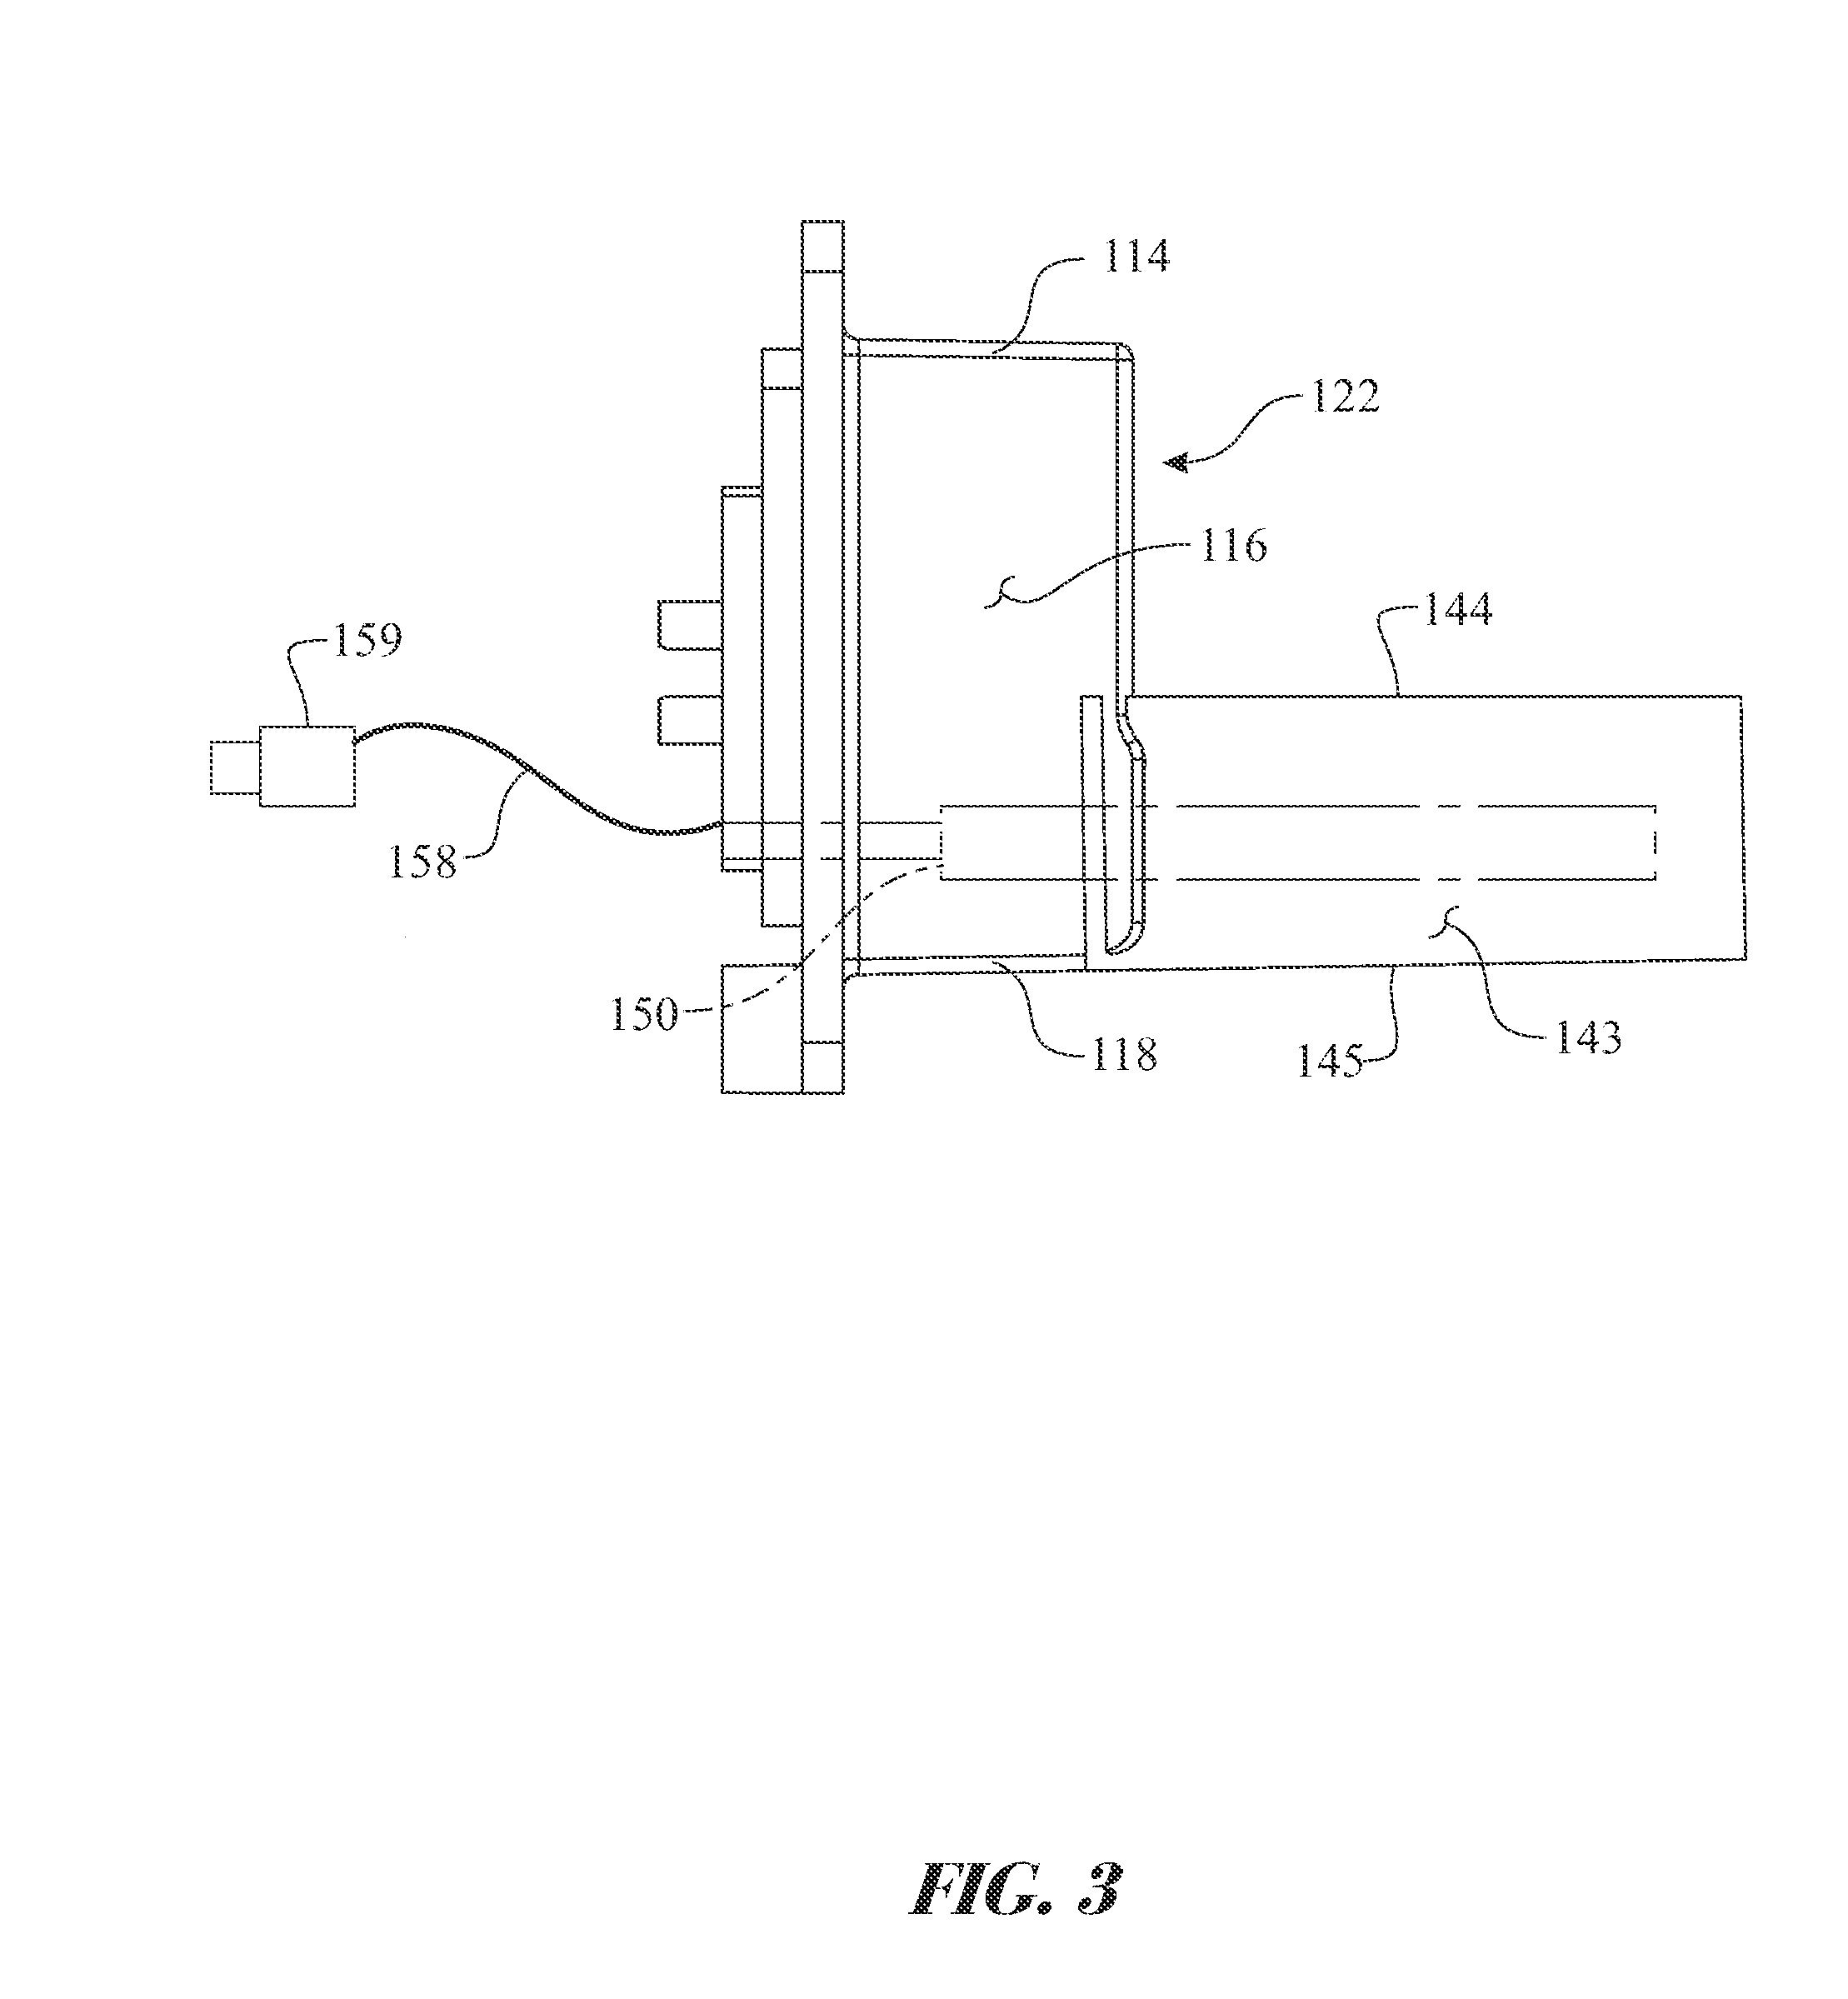 Bezel Assembly Comprising Biometric Authentication For Use with An Automated Transaction Device